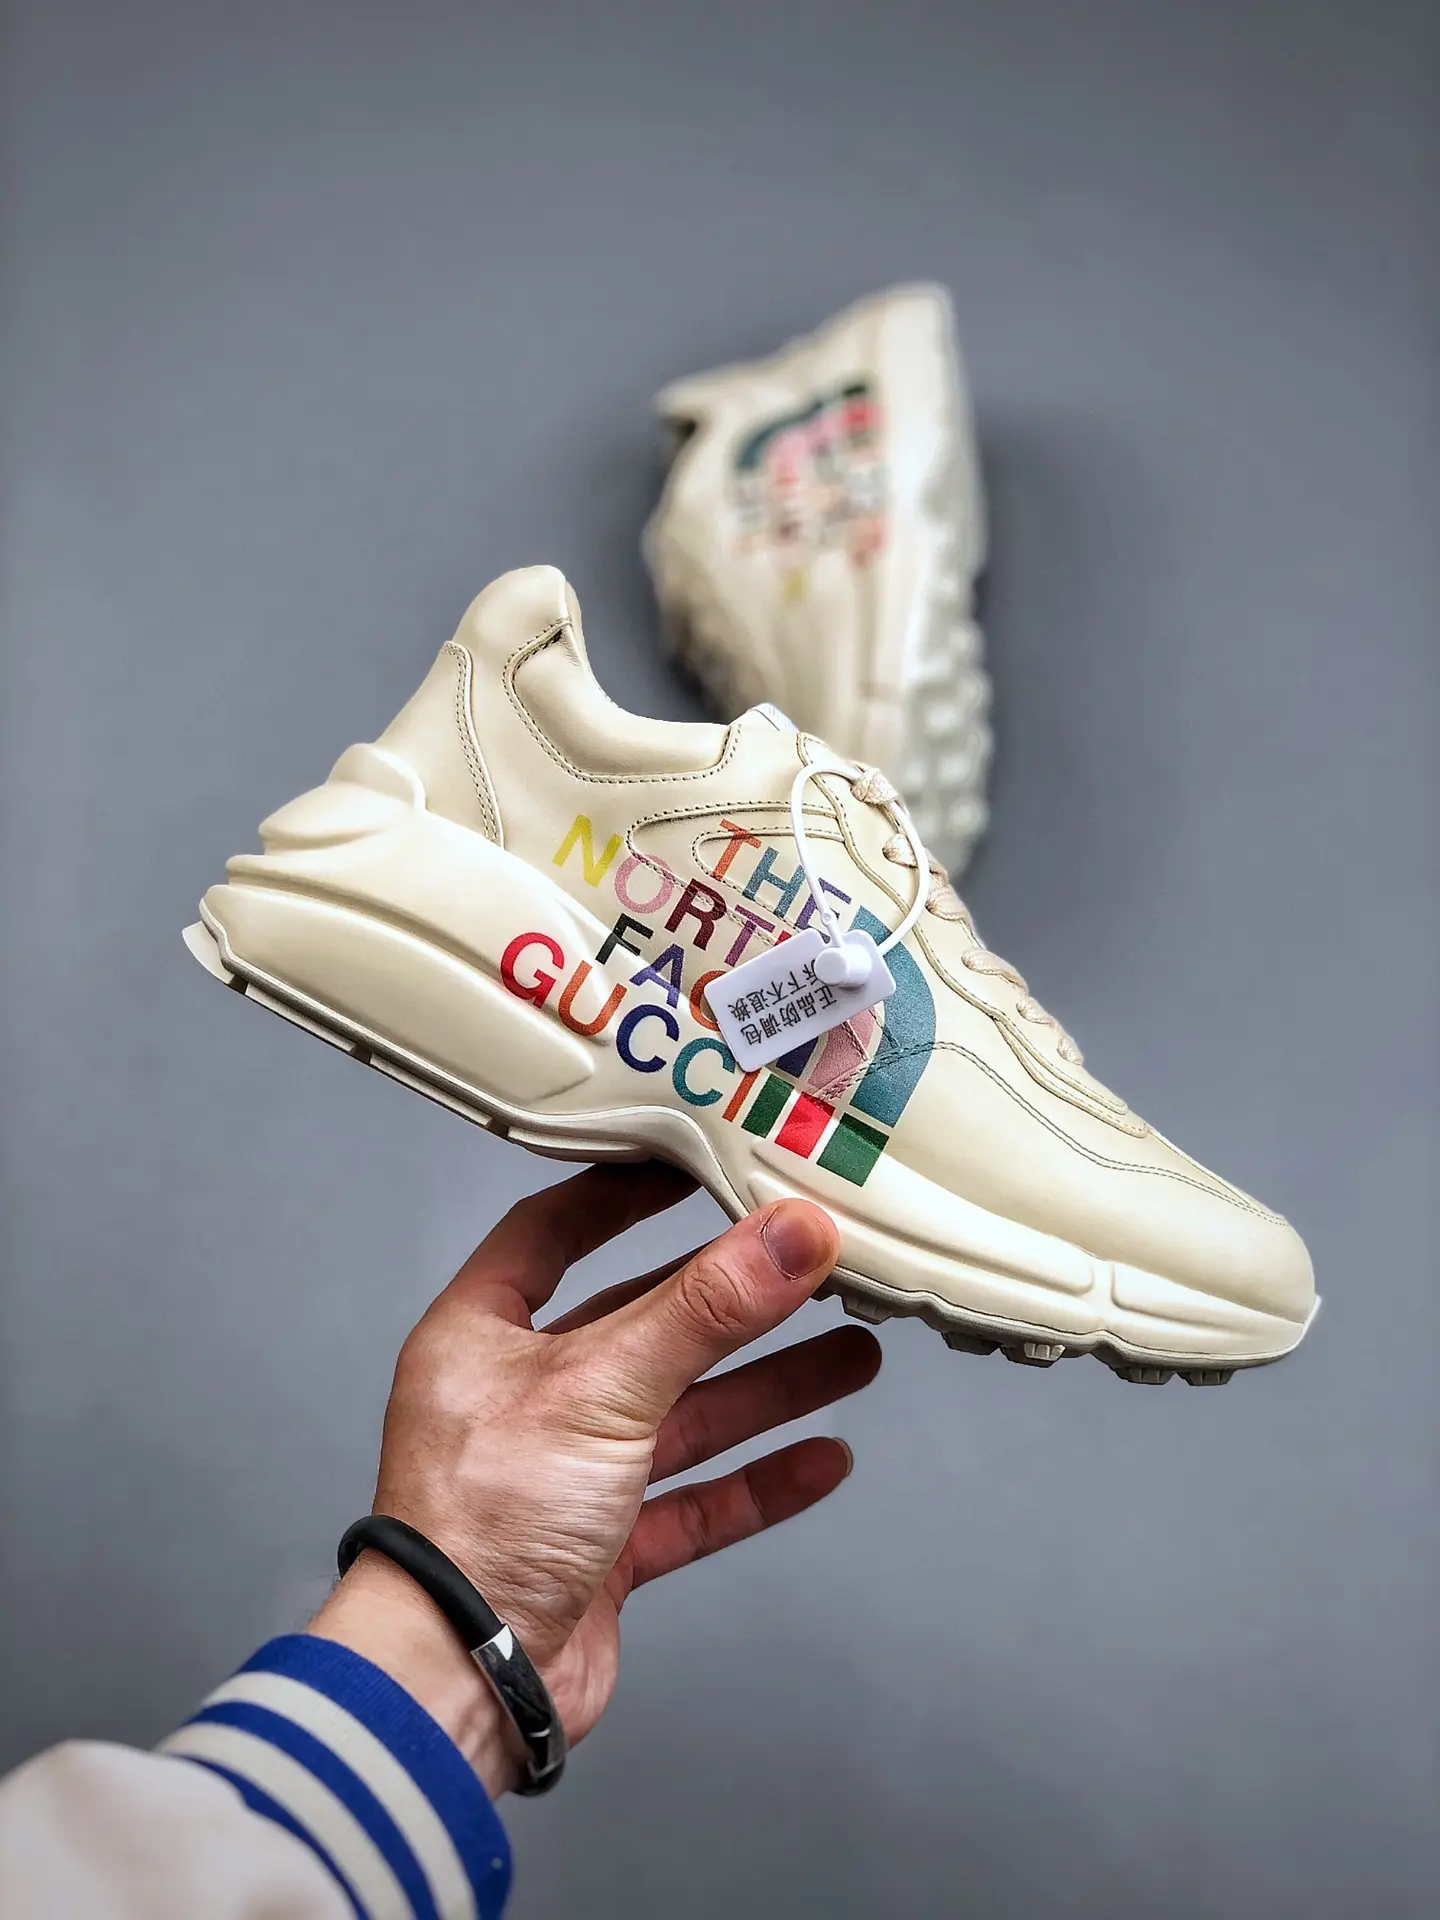 The North Face x Gucci Leather Printed Sneakers White Review | YtaYta